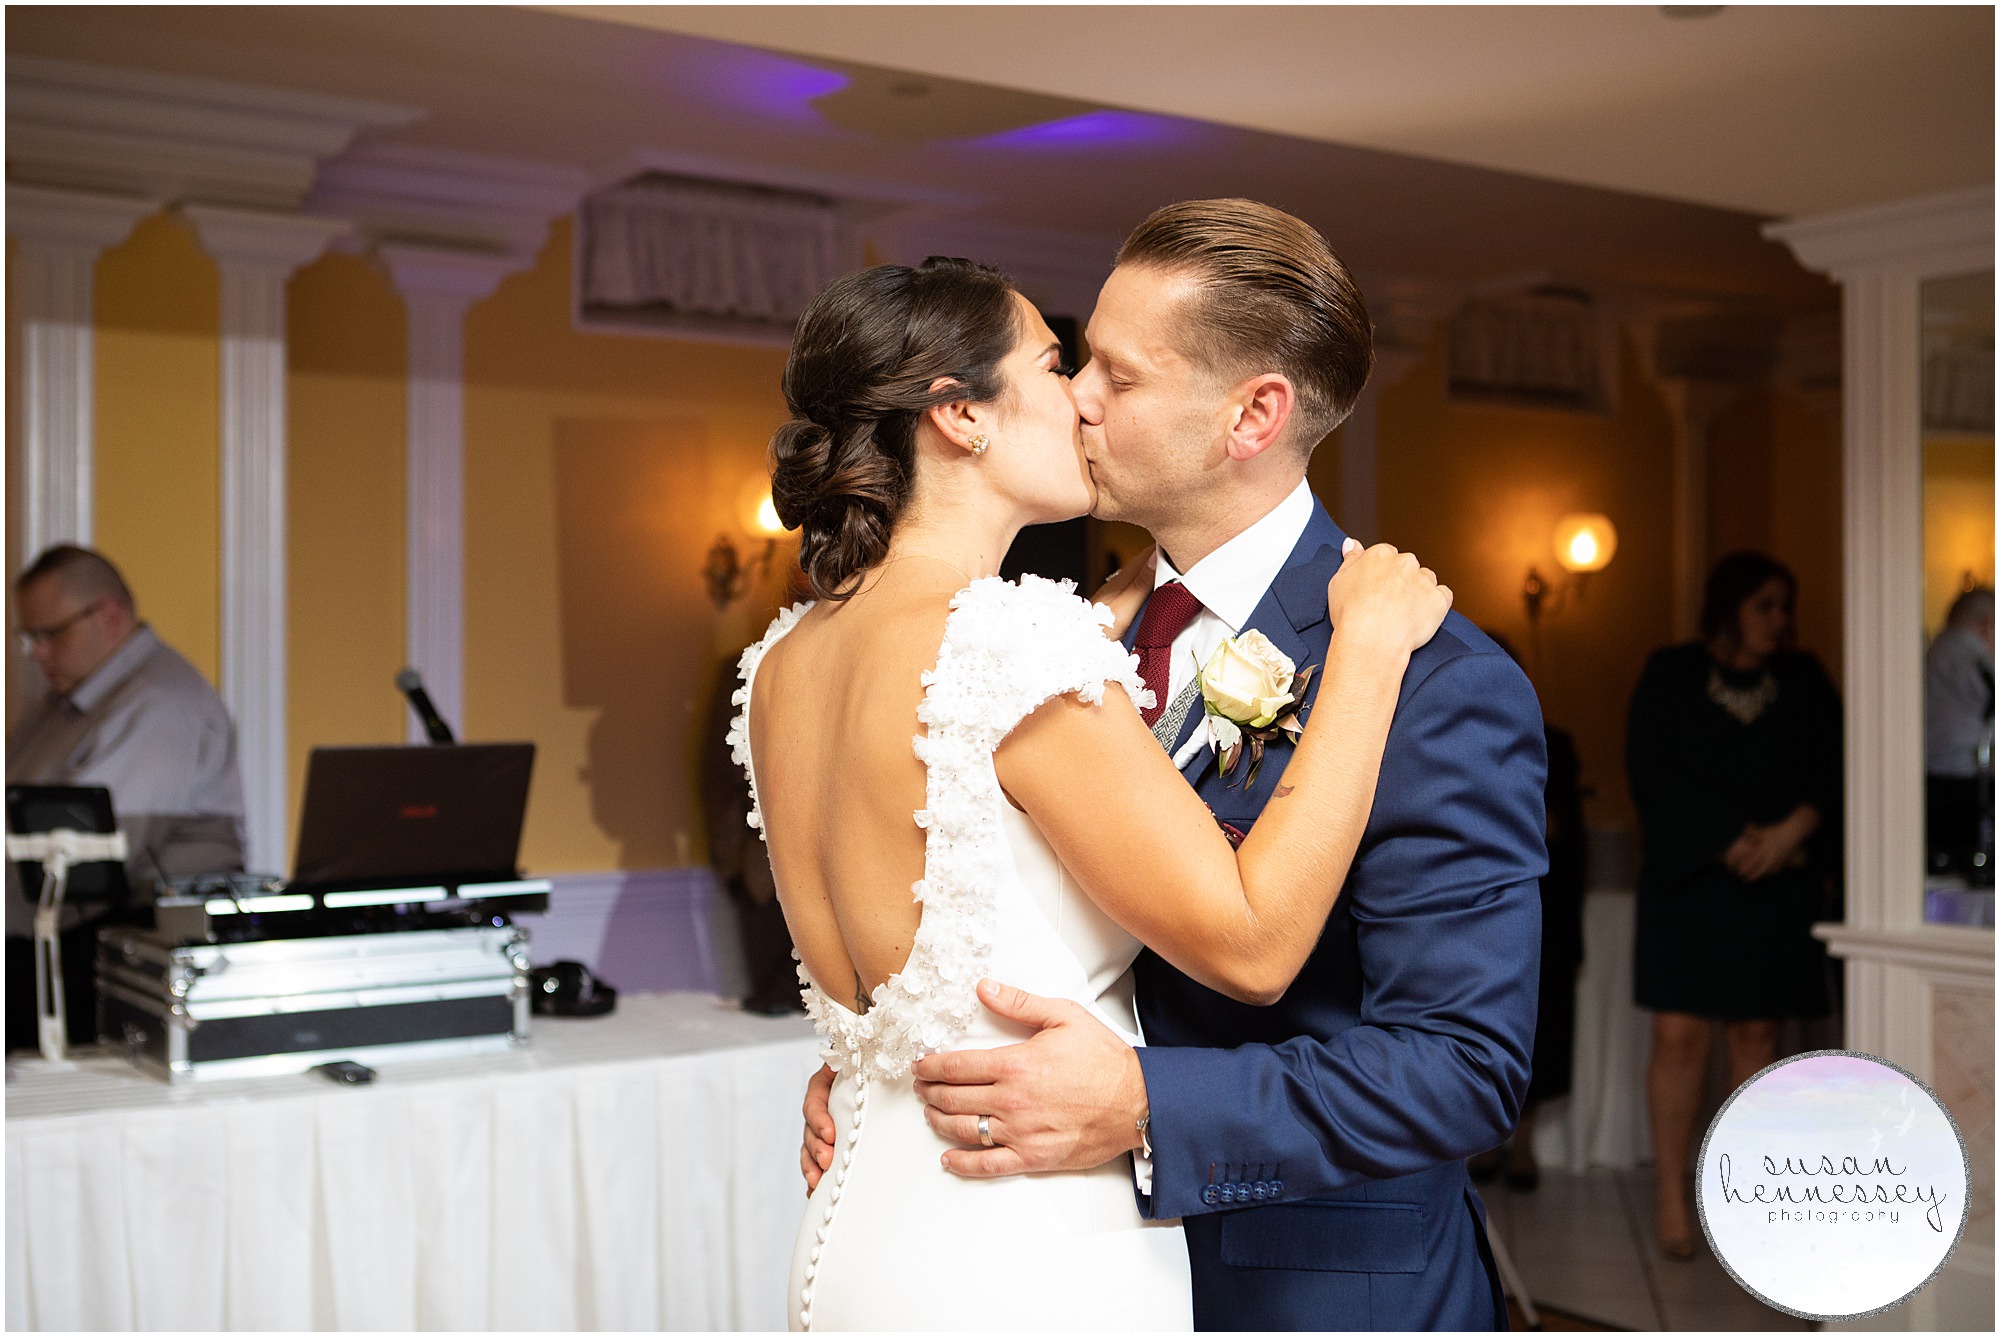 First dance at Southern Mansion wedding reception